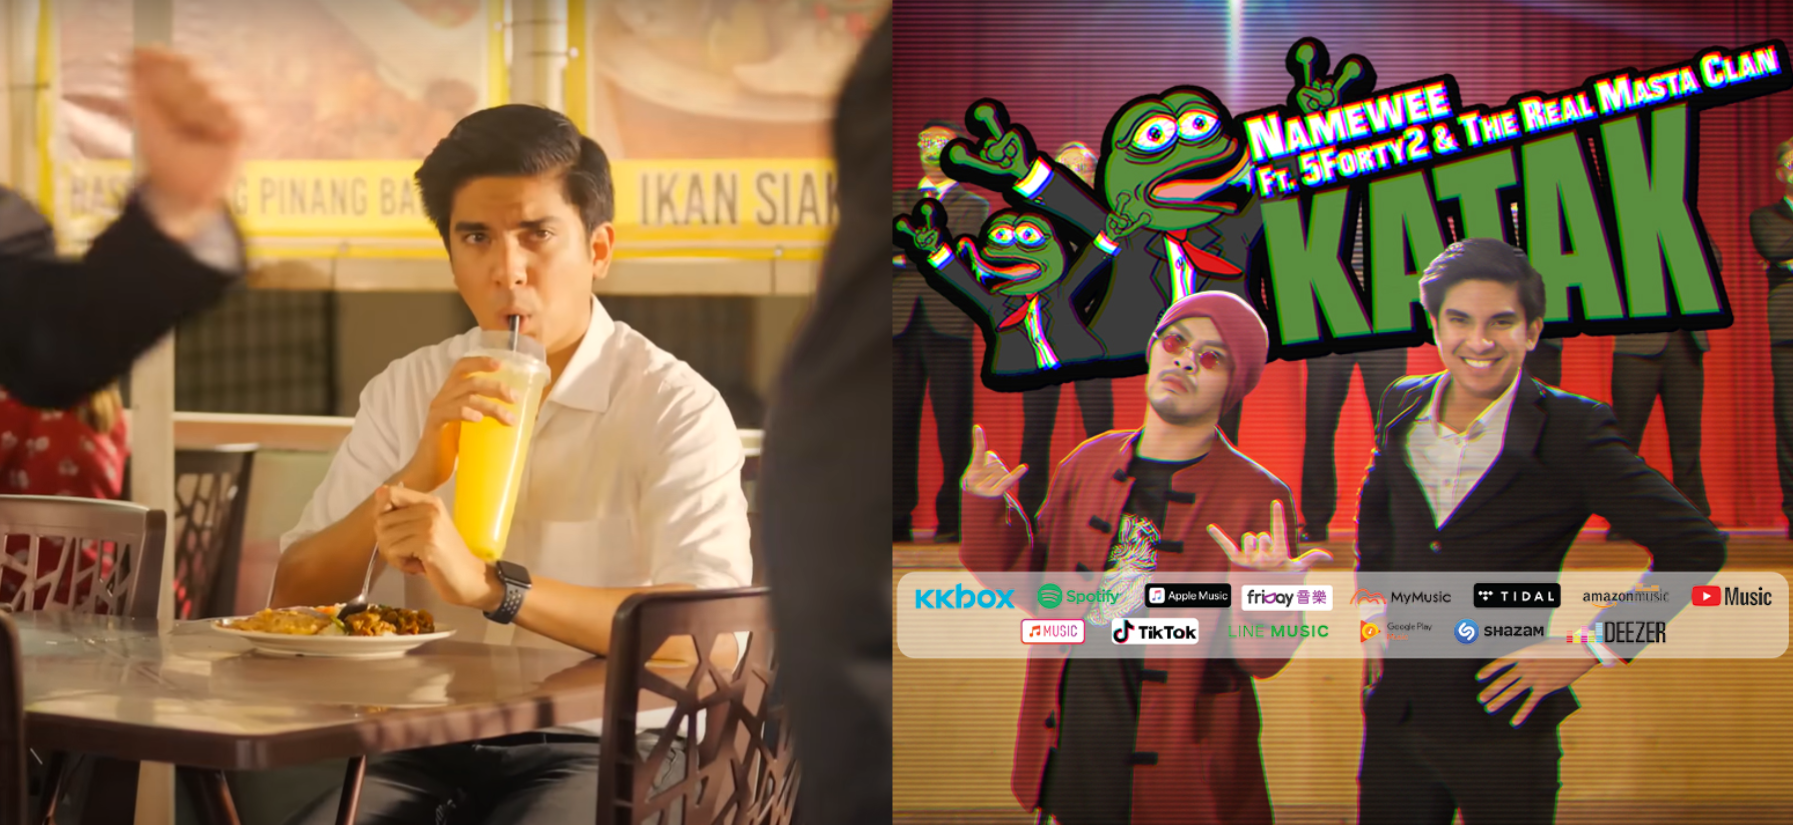 Among everything happening, seeing Syed Saddiq in a Namewee video was the most unexpected thing to happen. I guess as they say, “Hidup Katak!”